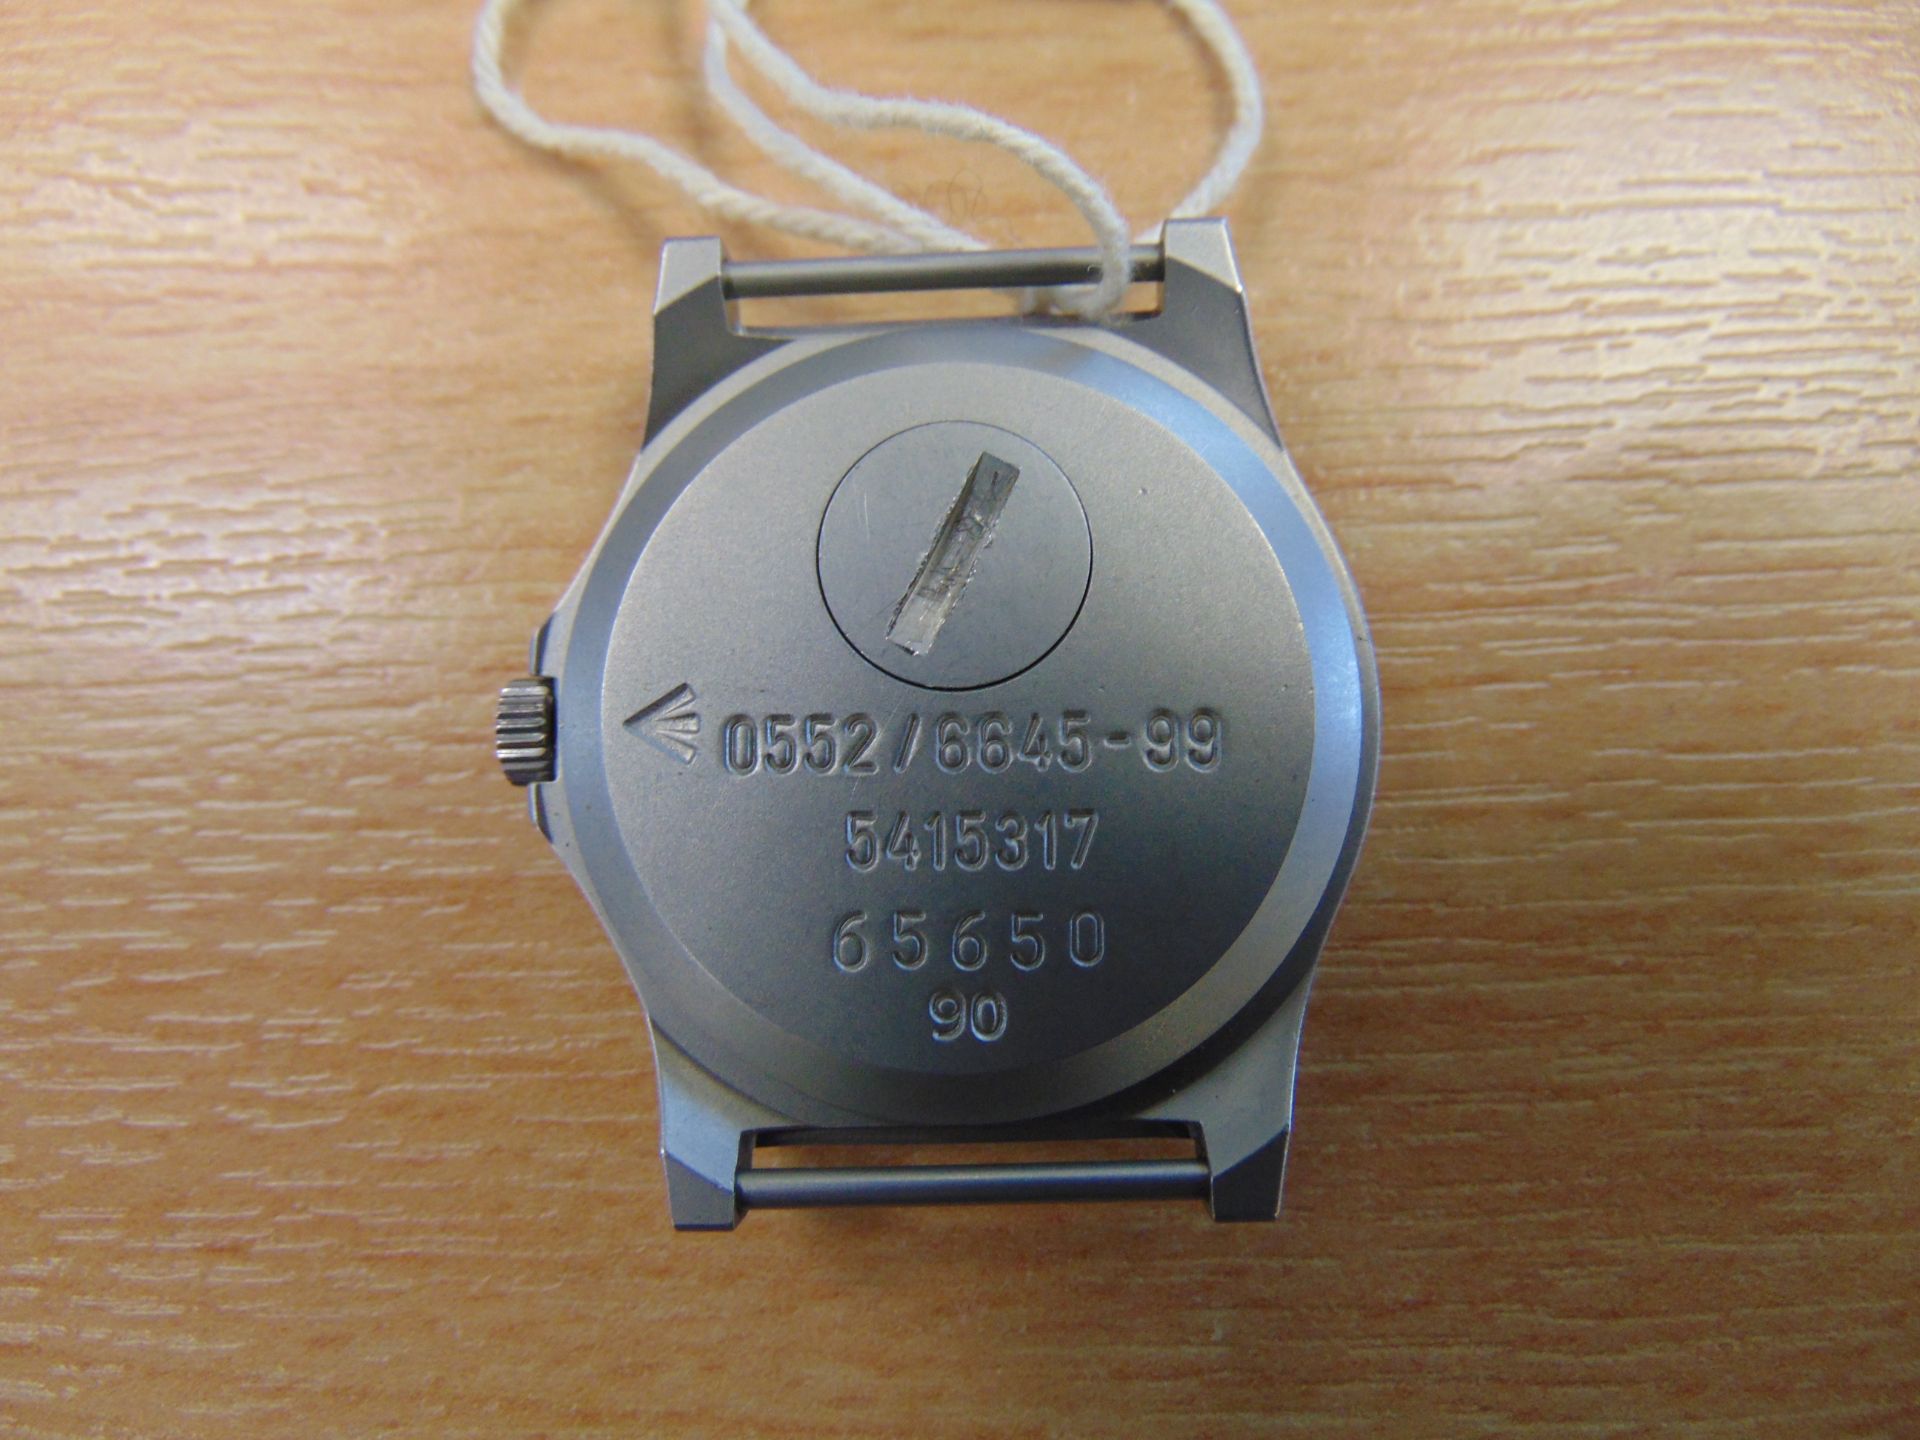 CWC 0552 Royal Marines / Navy Service Watch Nato Marked, Date 1990, * GULF WAR 1 * - Image 3 of 4